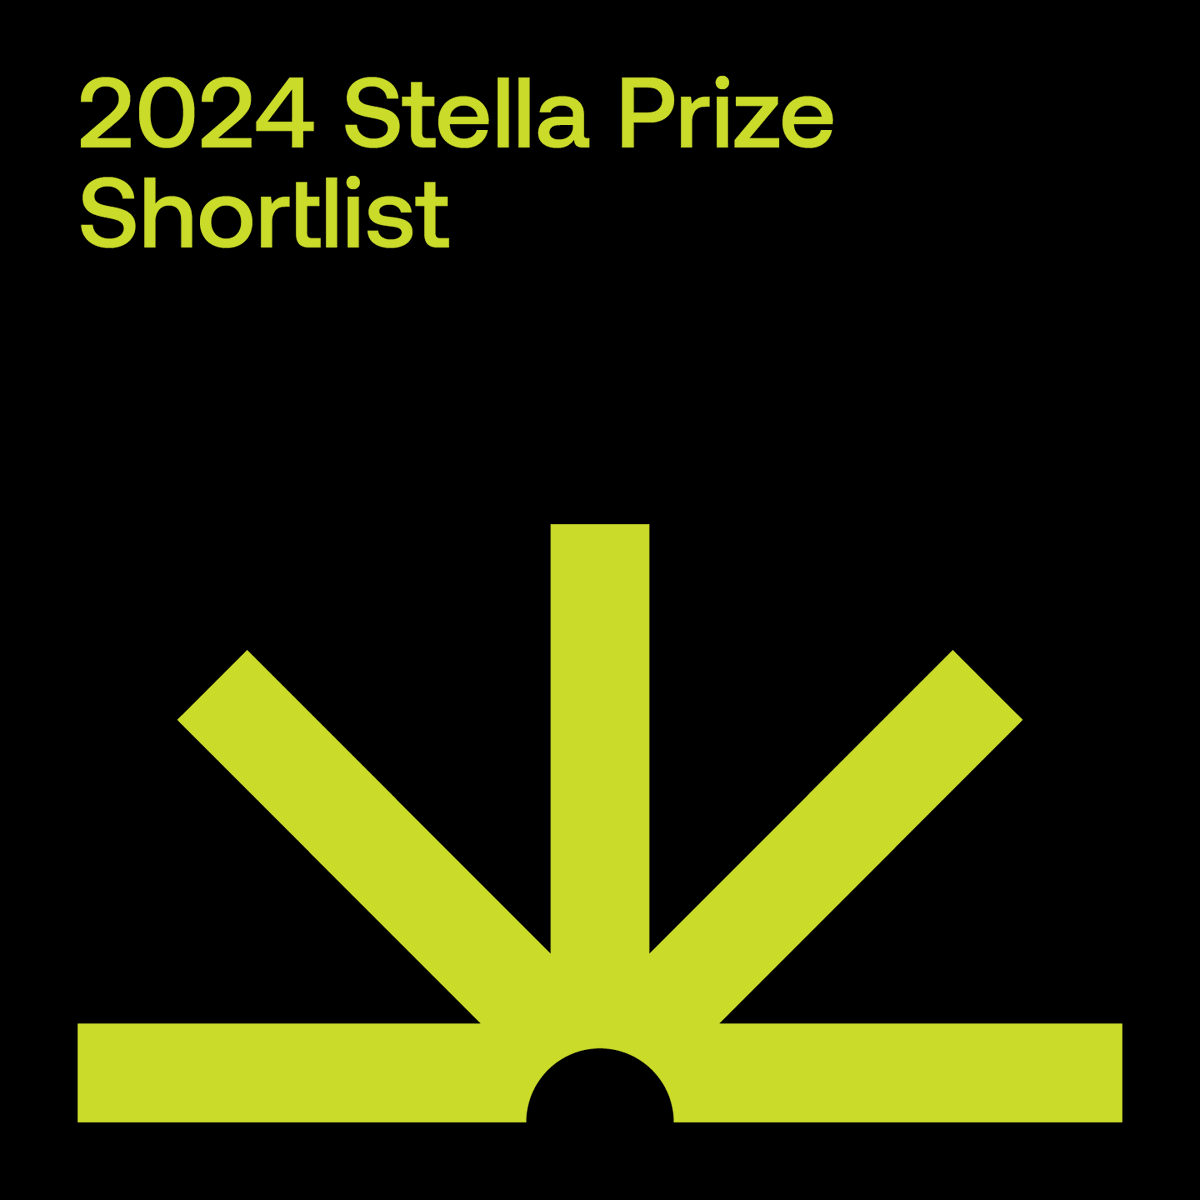 📆 Mark your calendars! The #2024stellaprize shortlist will be announced on Thursday 4 April. Which books do you think will be on the list?